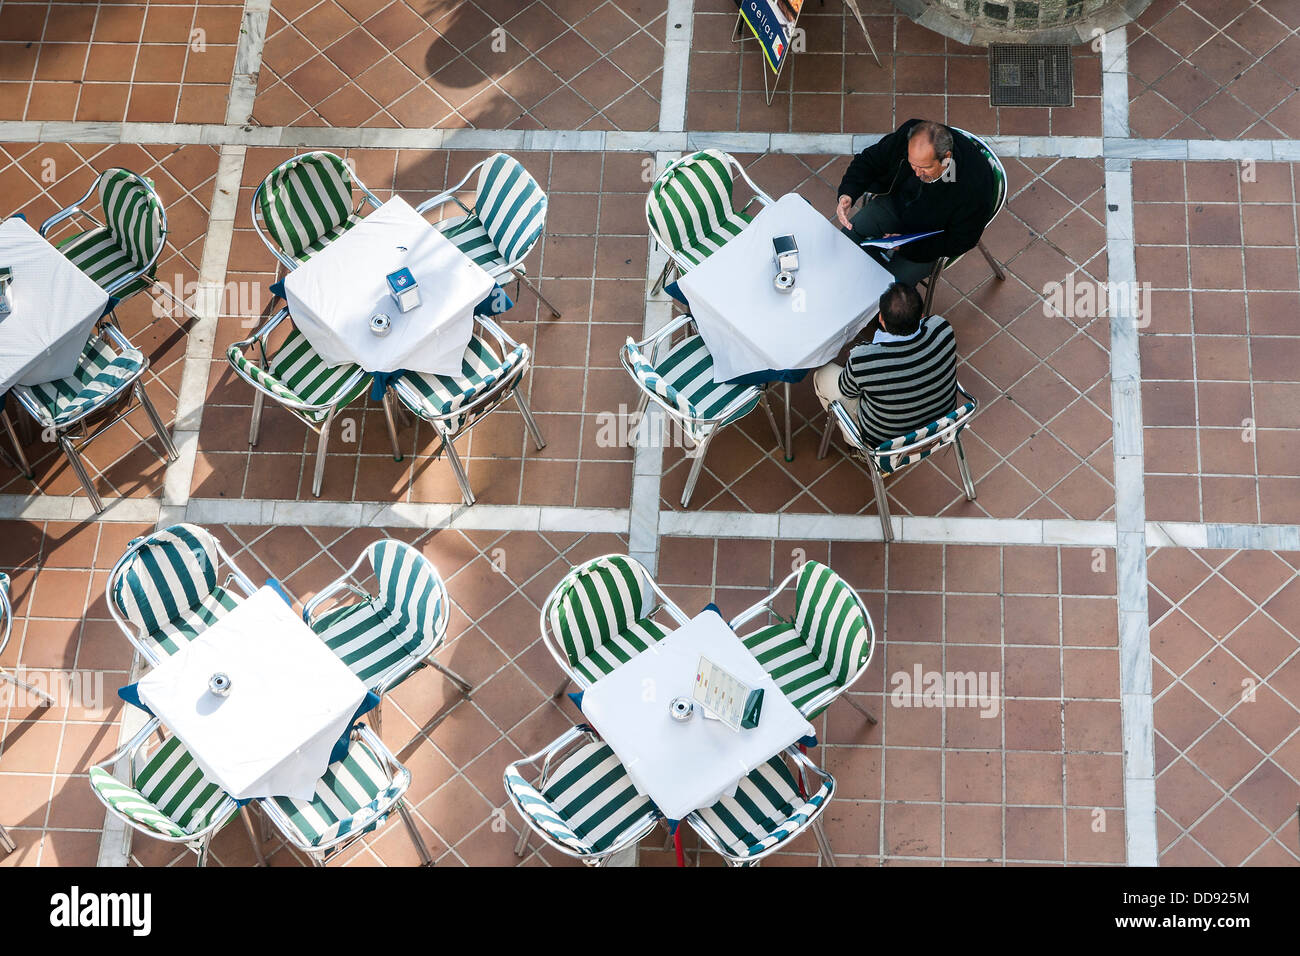 Man at estaurant tables and chairs, Mijas, Spain Stock Photo